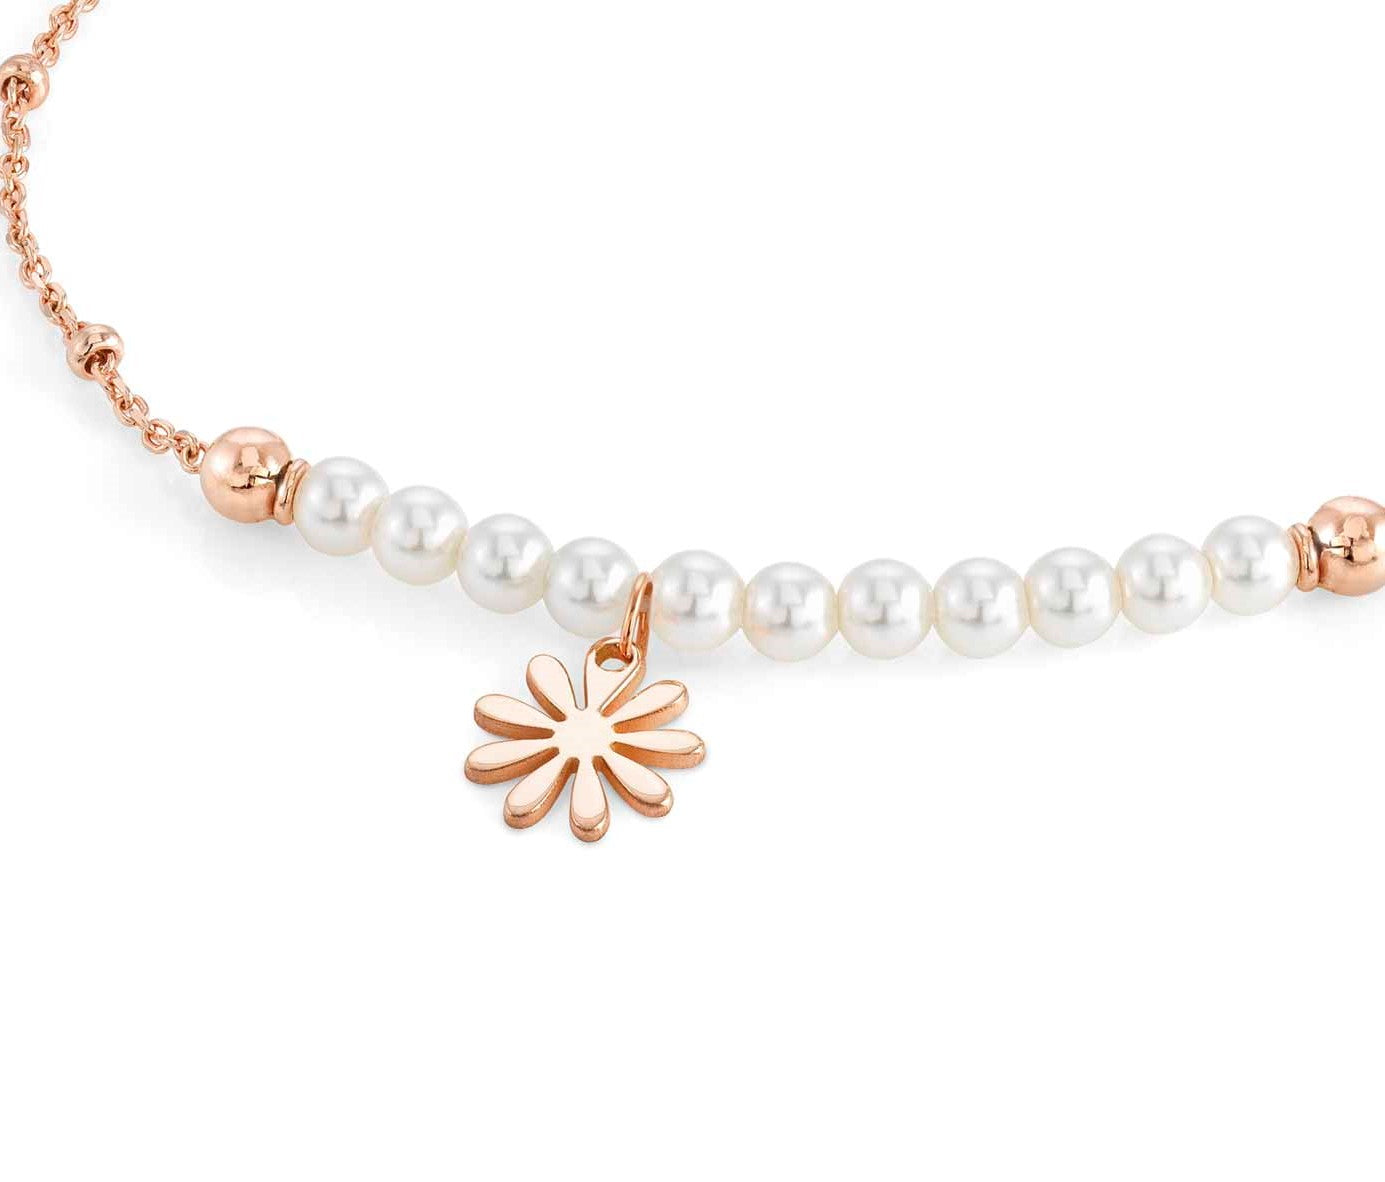 Nomination Melodie Bracelet with White Pearls & Rose Flowers in Rose Gold Tone